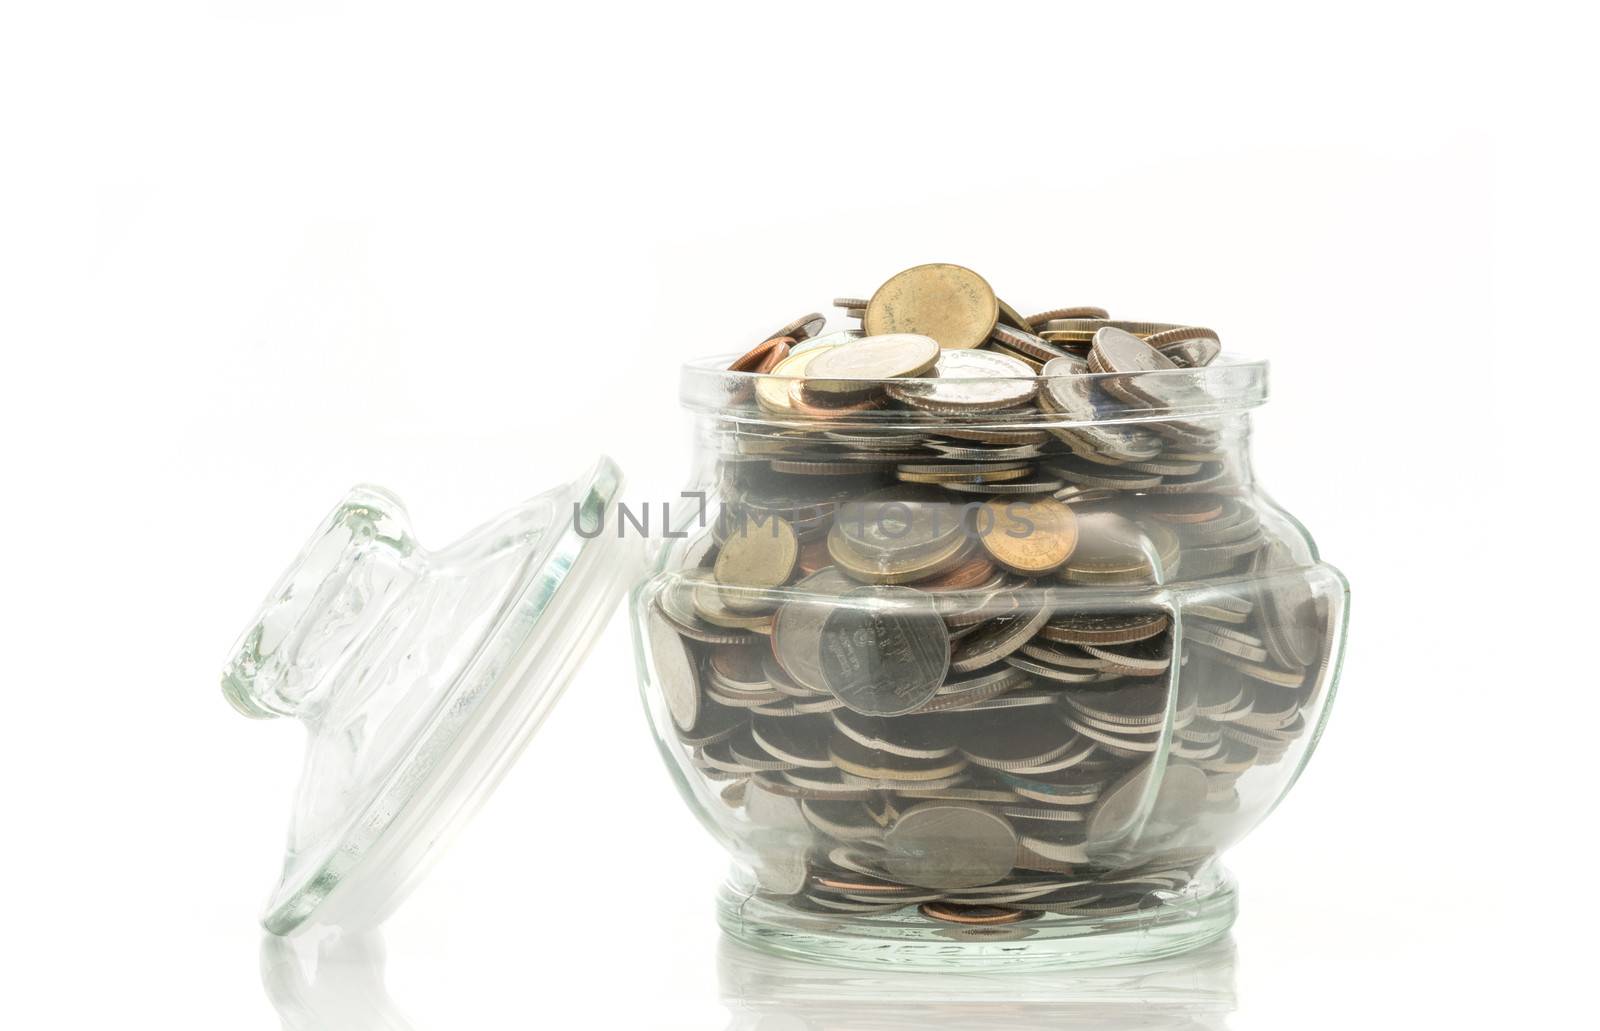 Bath coins in a glass jar with lid on white background